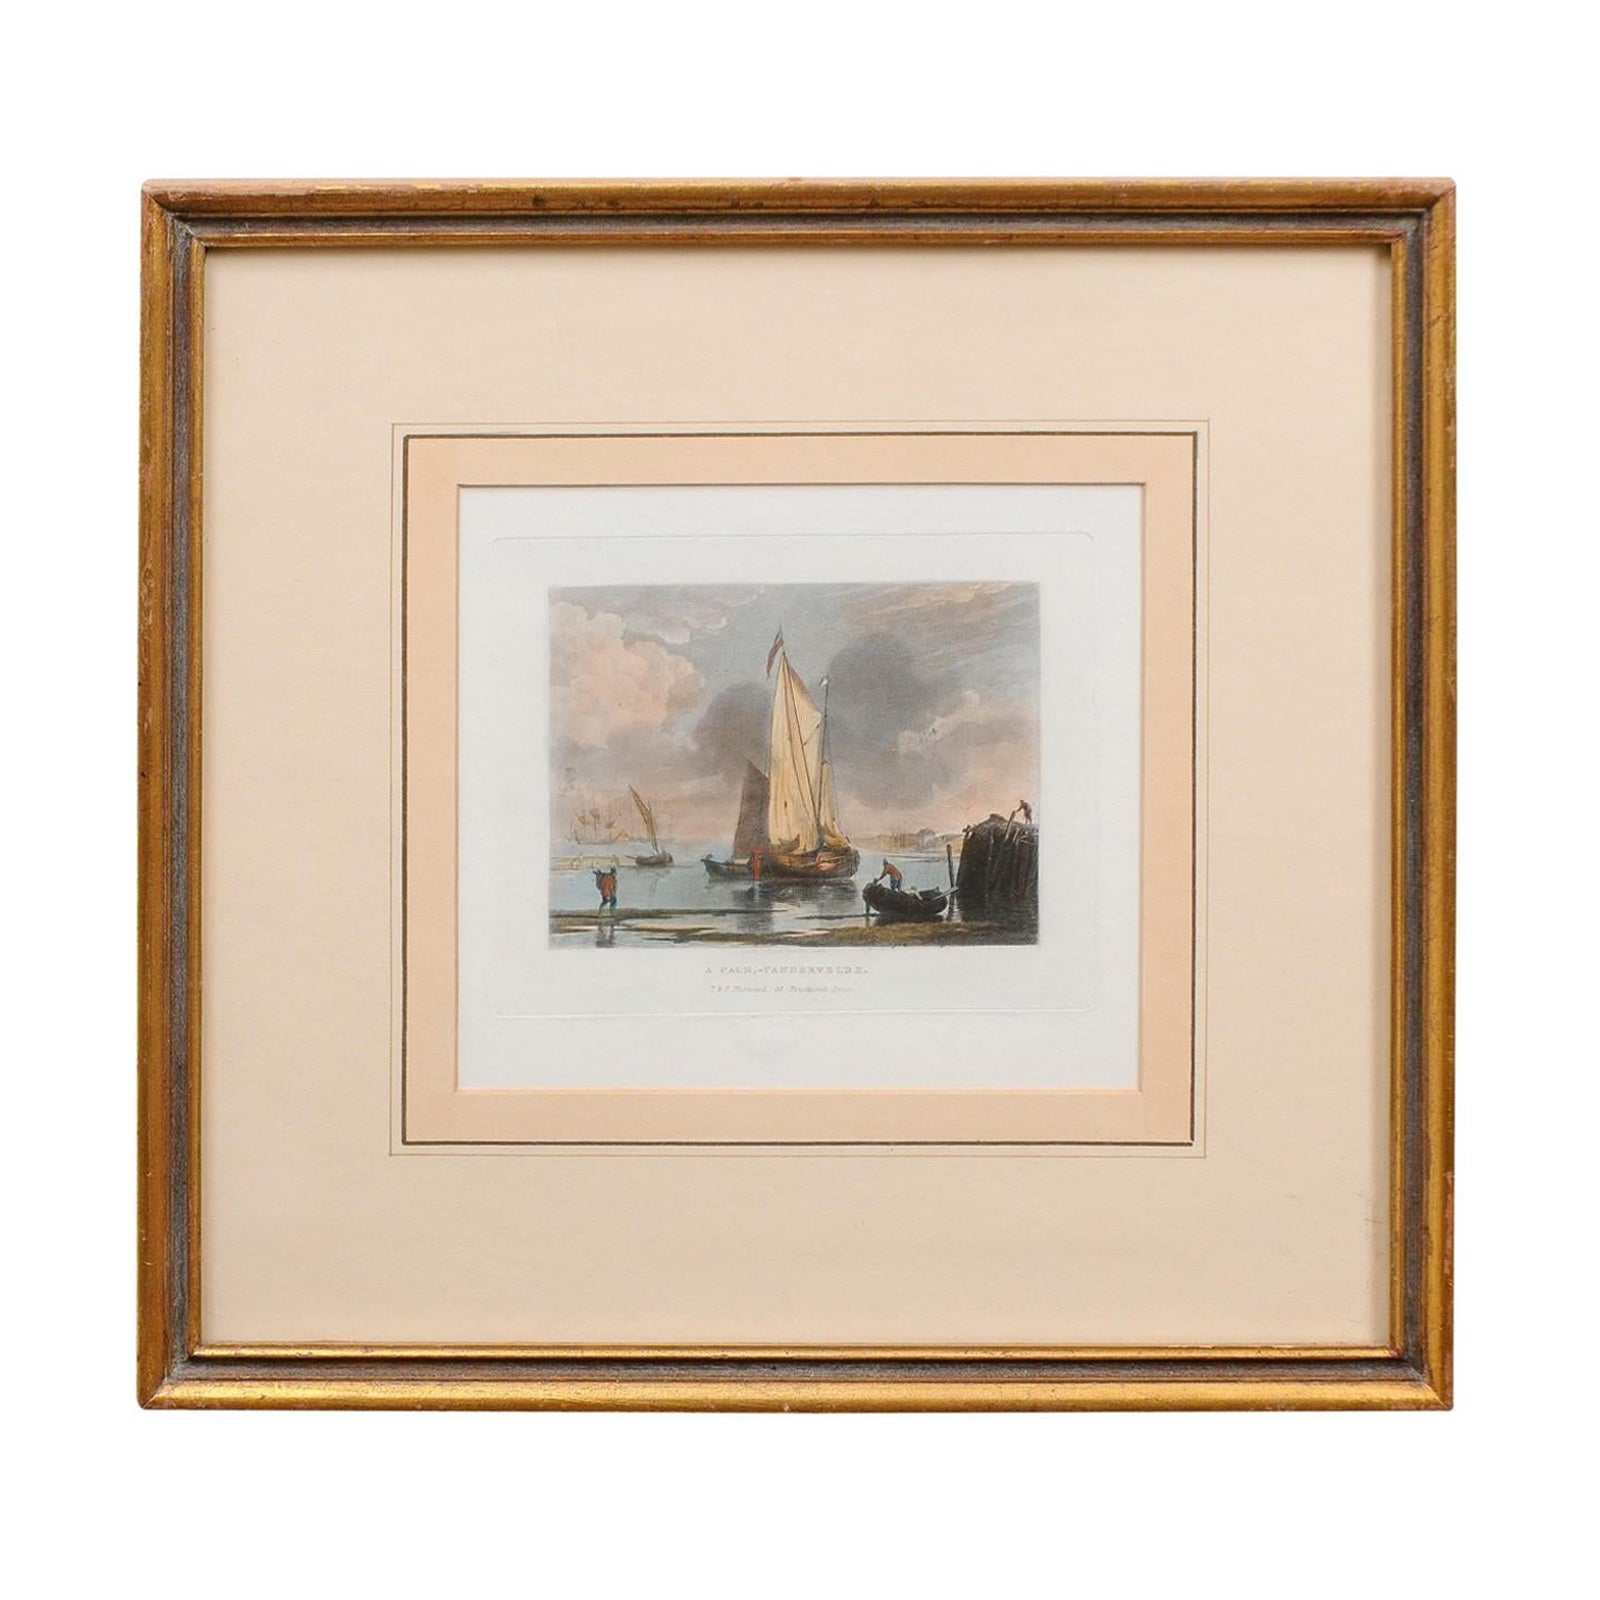 Framed 19th Century Engraving of Sailboat, London